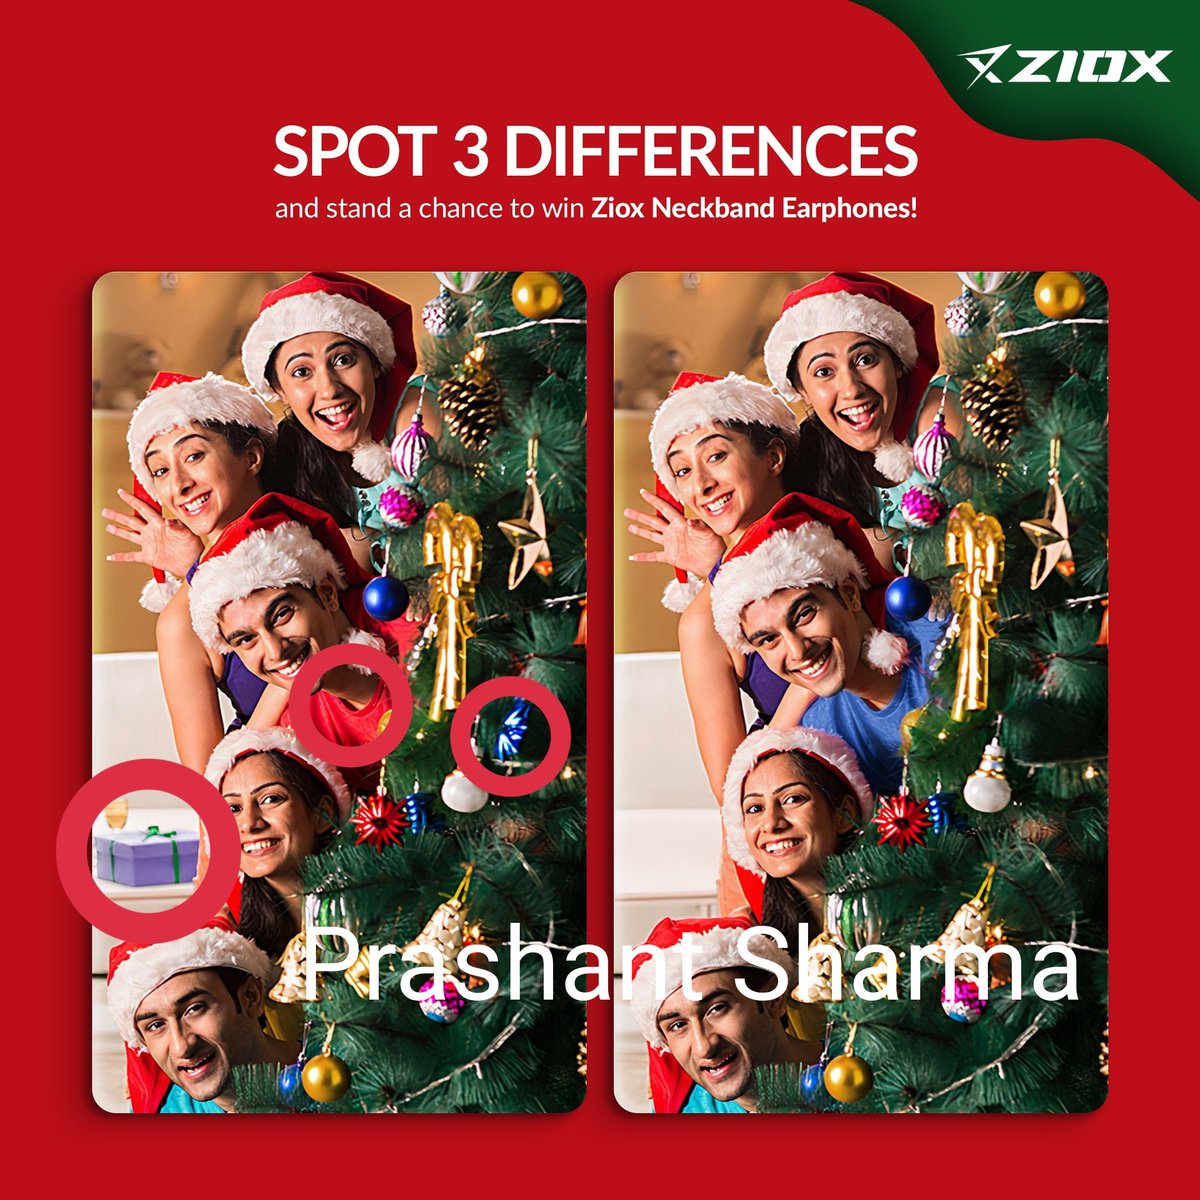 @Zioxofficial Here's I Have Spotted 3 Differences in the Picture... 
1. 3rd Boys Tshirt Colour Differs
2. Gift Missing at Extreme Left
3. Blue star on Xmas tree missing 
#XmasContest #ChristmasContest 
#BluetoothNeckband #Ziox #Contest 
@Zioxofficial
@sd12dec @Sandeep13_ @Gayathrimohan_